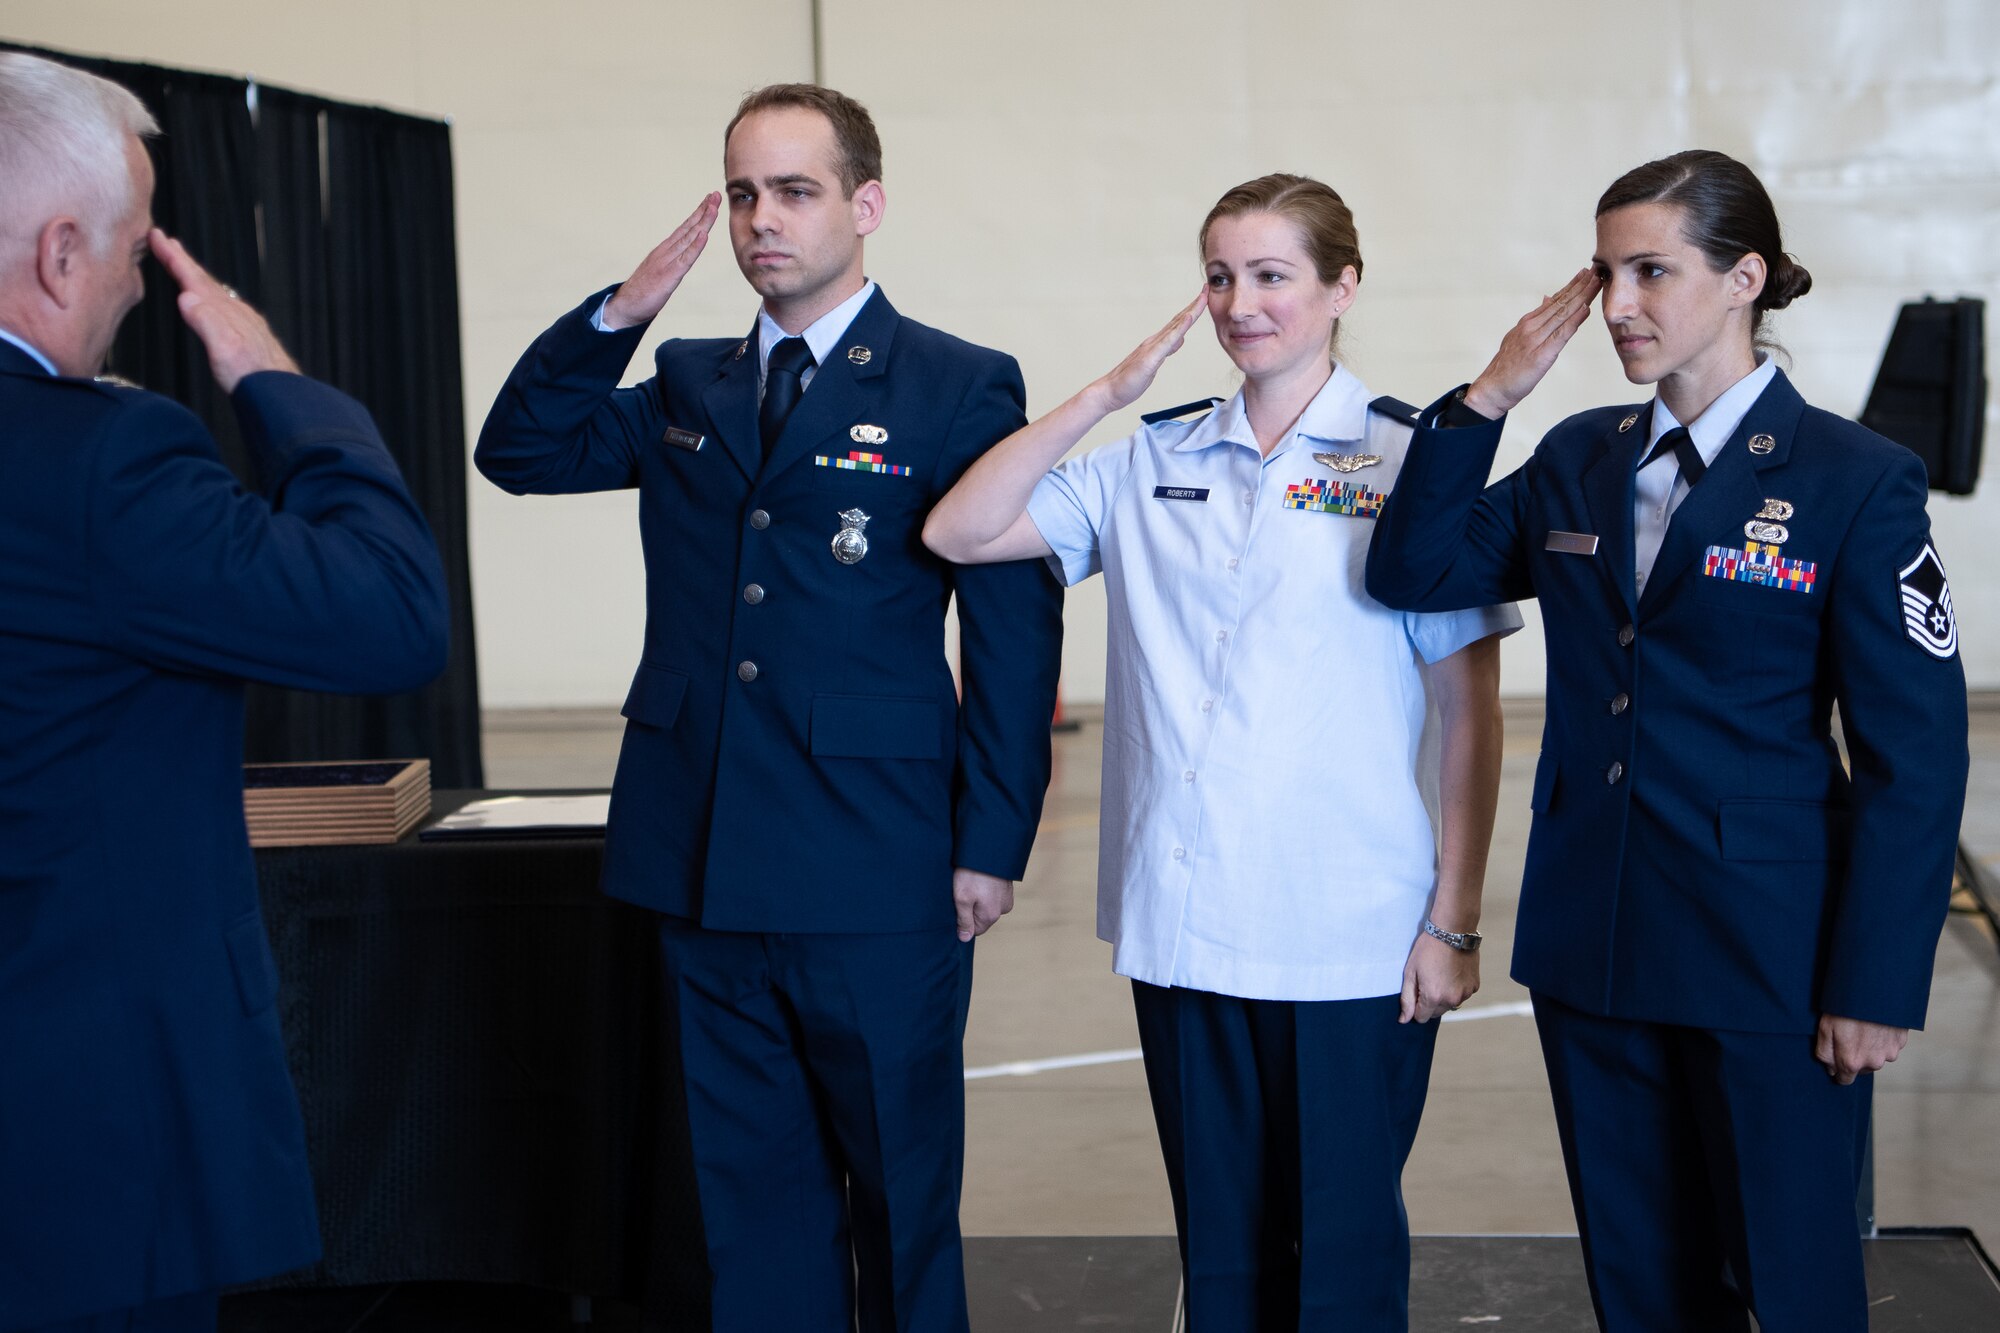 Col. Douglas D. Hayworth, 137th Special Operations Wing vice commander, receives final salutes from his three children during his retirement ceremony held in the historical hangar at Will Rogers Air National Guard Base in Oklahoma City, May 4, 2018. Hayworth retired after serving more than 30 years with the Wing. (U.S. Air National Guard Photo by Tech. Sgt. Kasey M. Phipps)